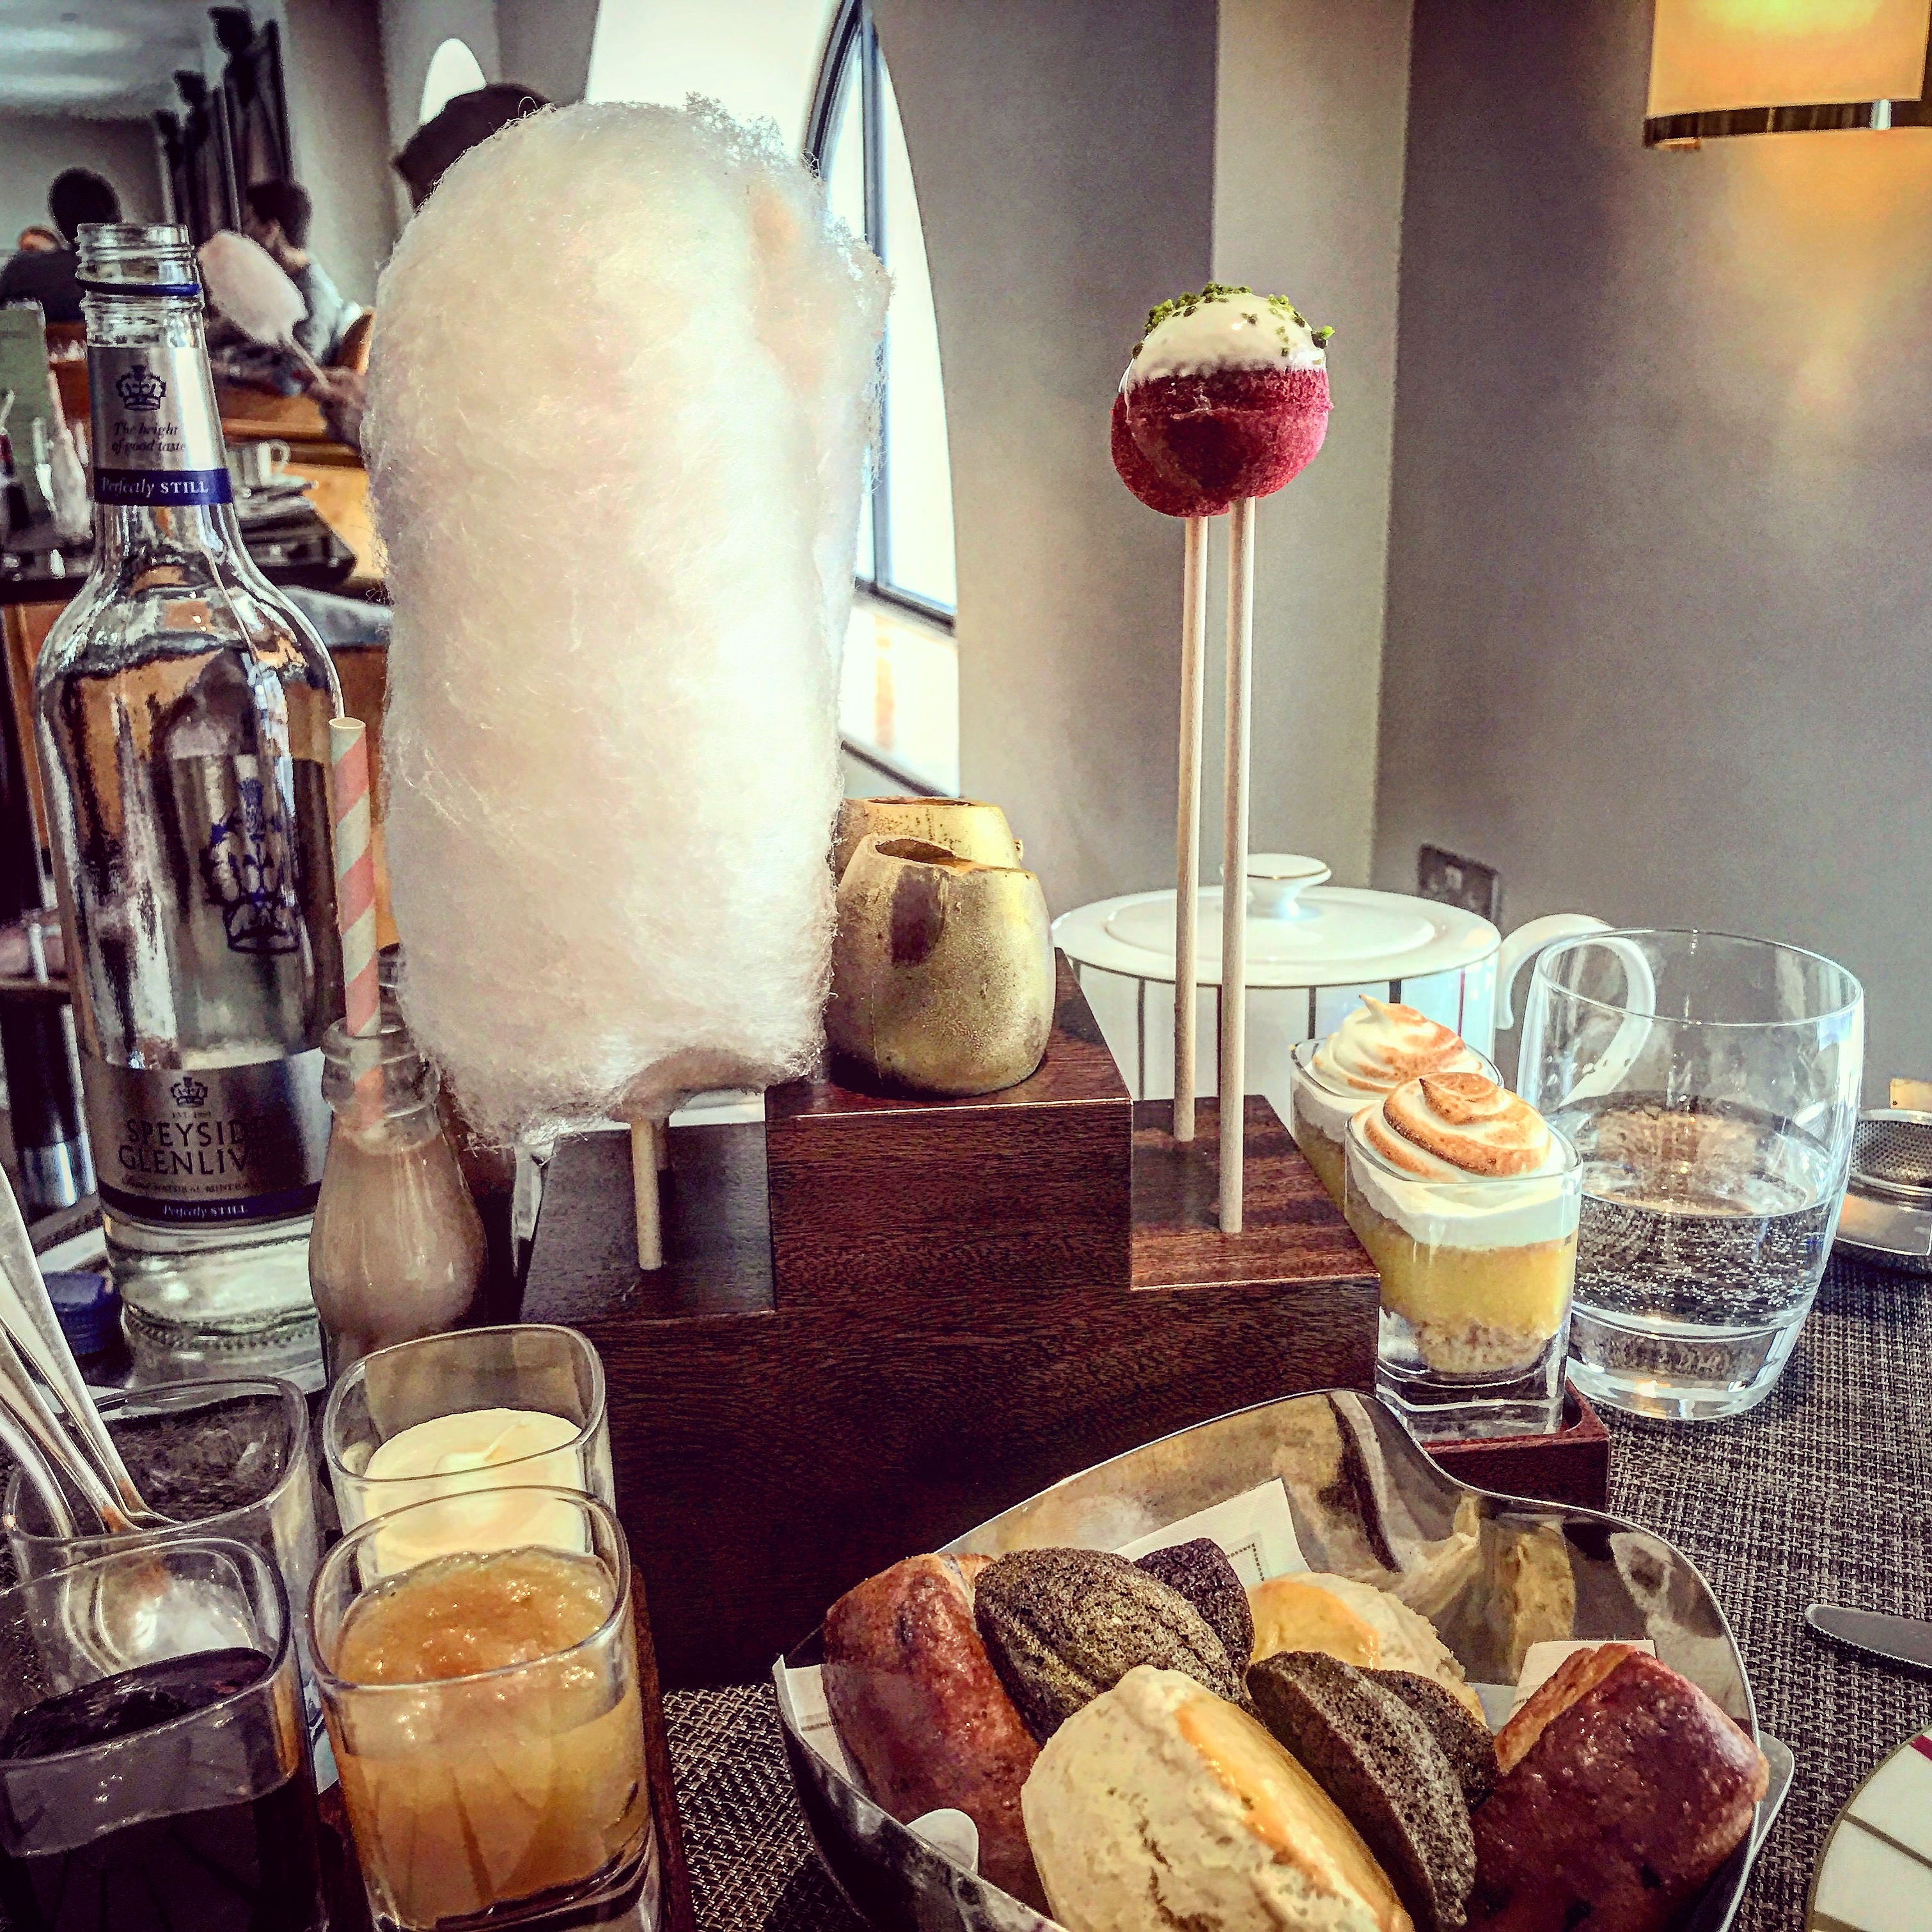 Afternoon Tea at One Aldwych with the theme as Charlie and the Chocolate Factory